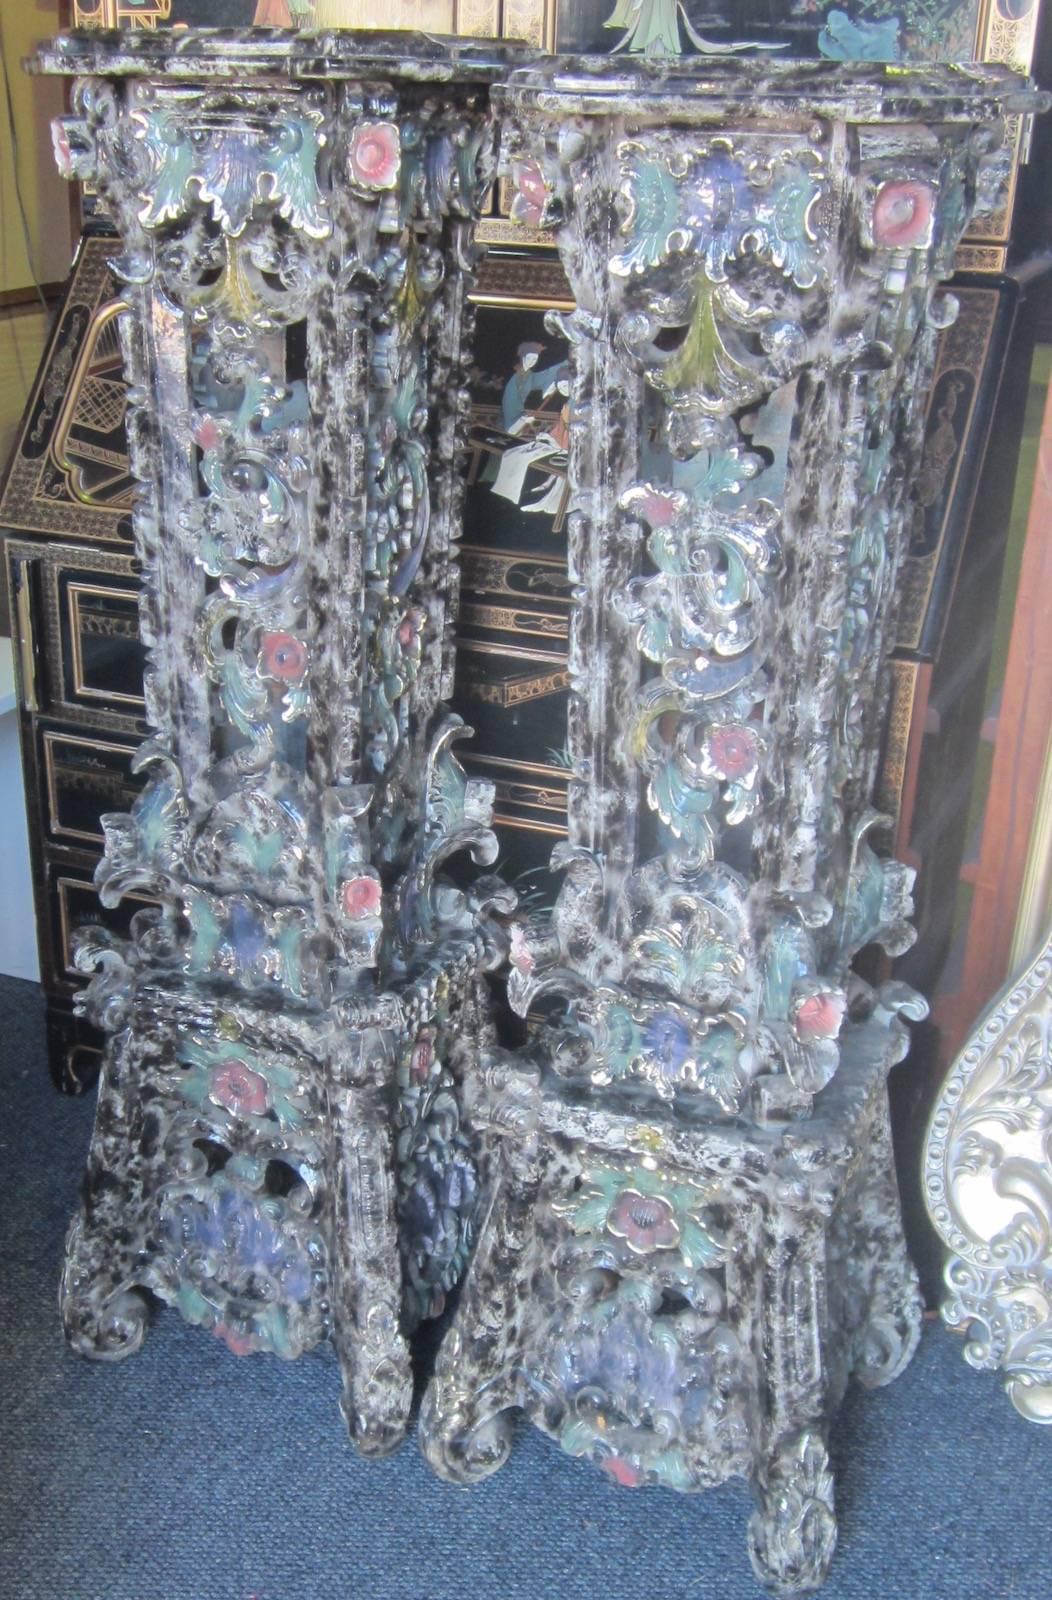 Pair of large Chinese ornate wooden pedestals with a lacquer finish,
Measures: 38 x 38 x 120cm high.